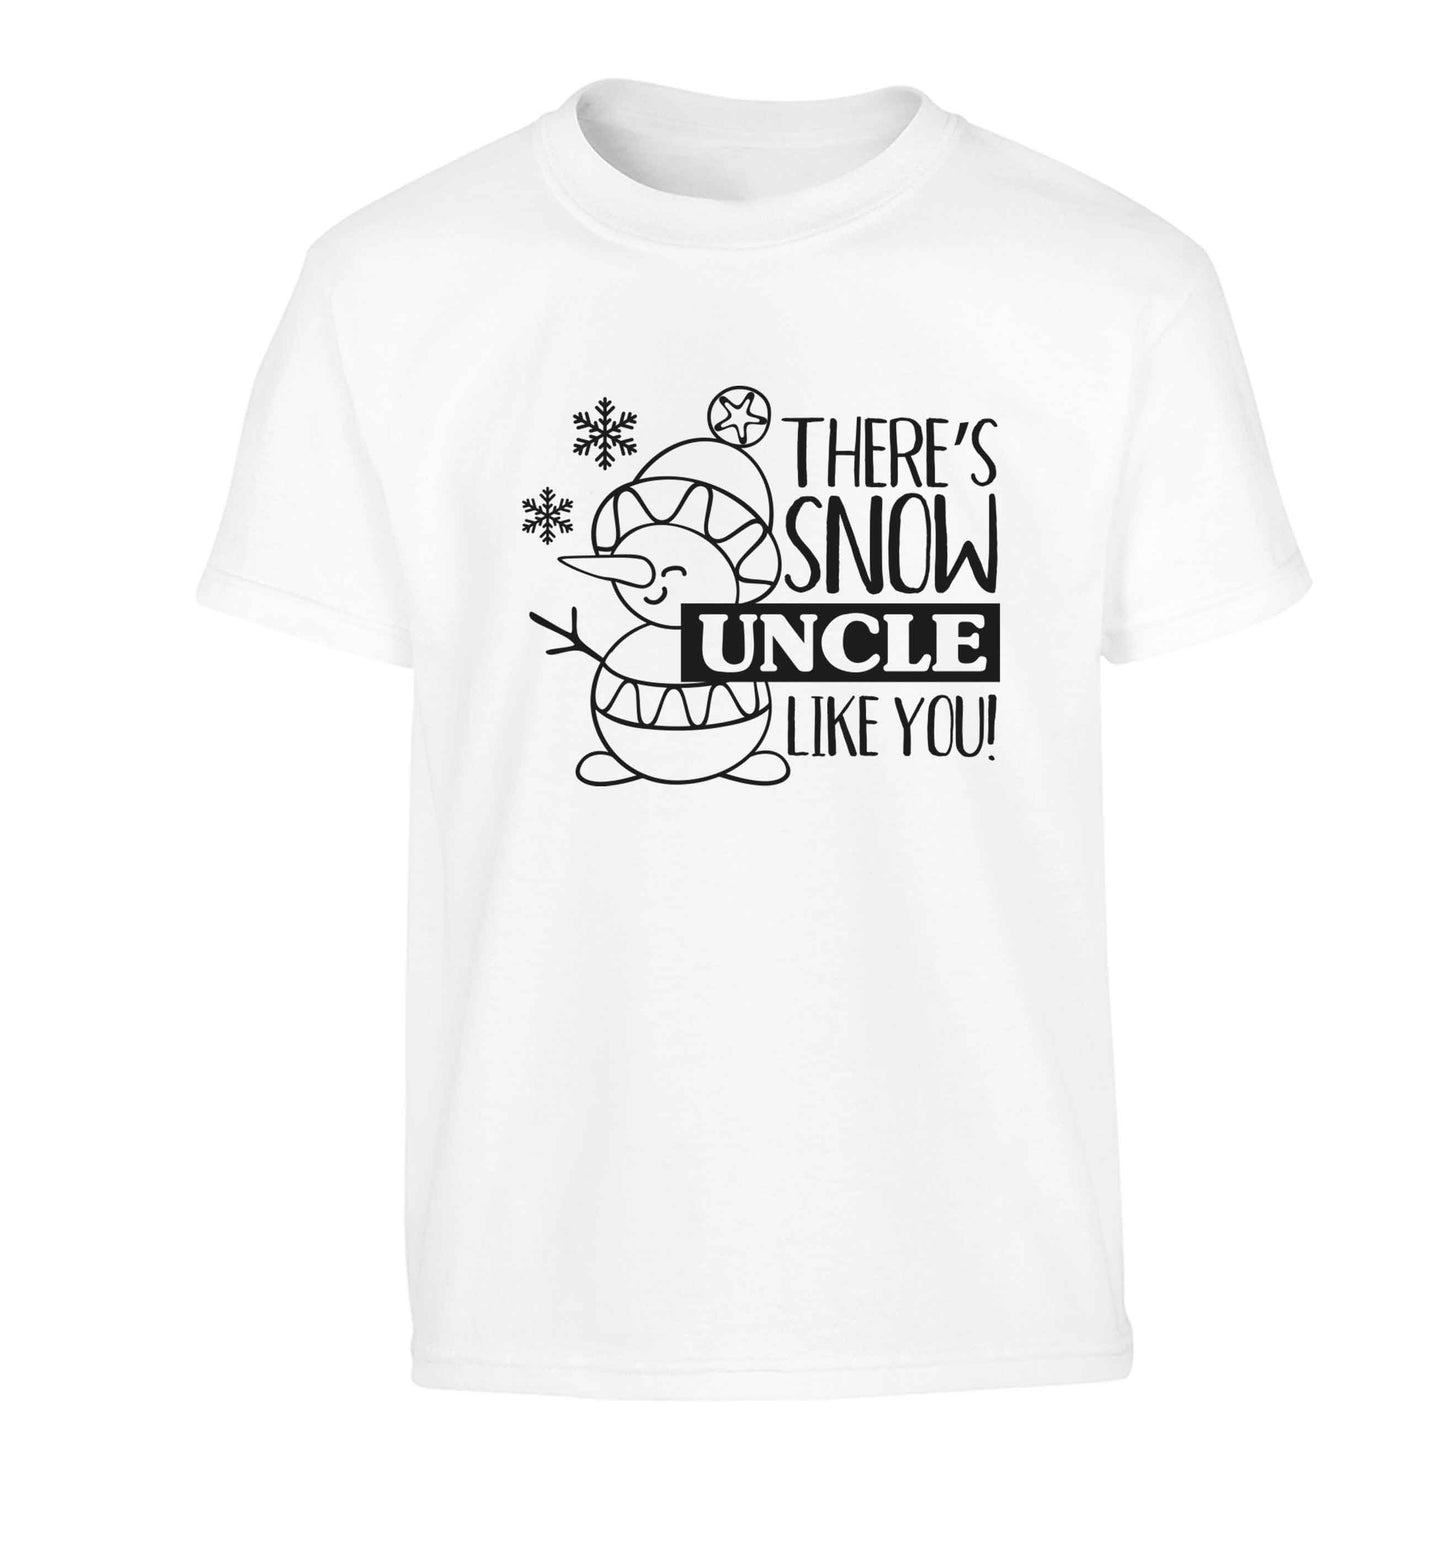 There's snow uncle like you Children's white Tshirt 12-13 Years